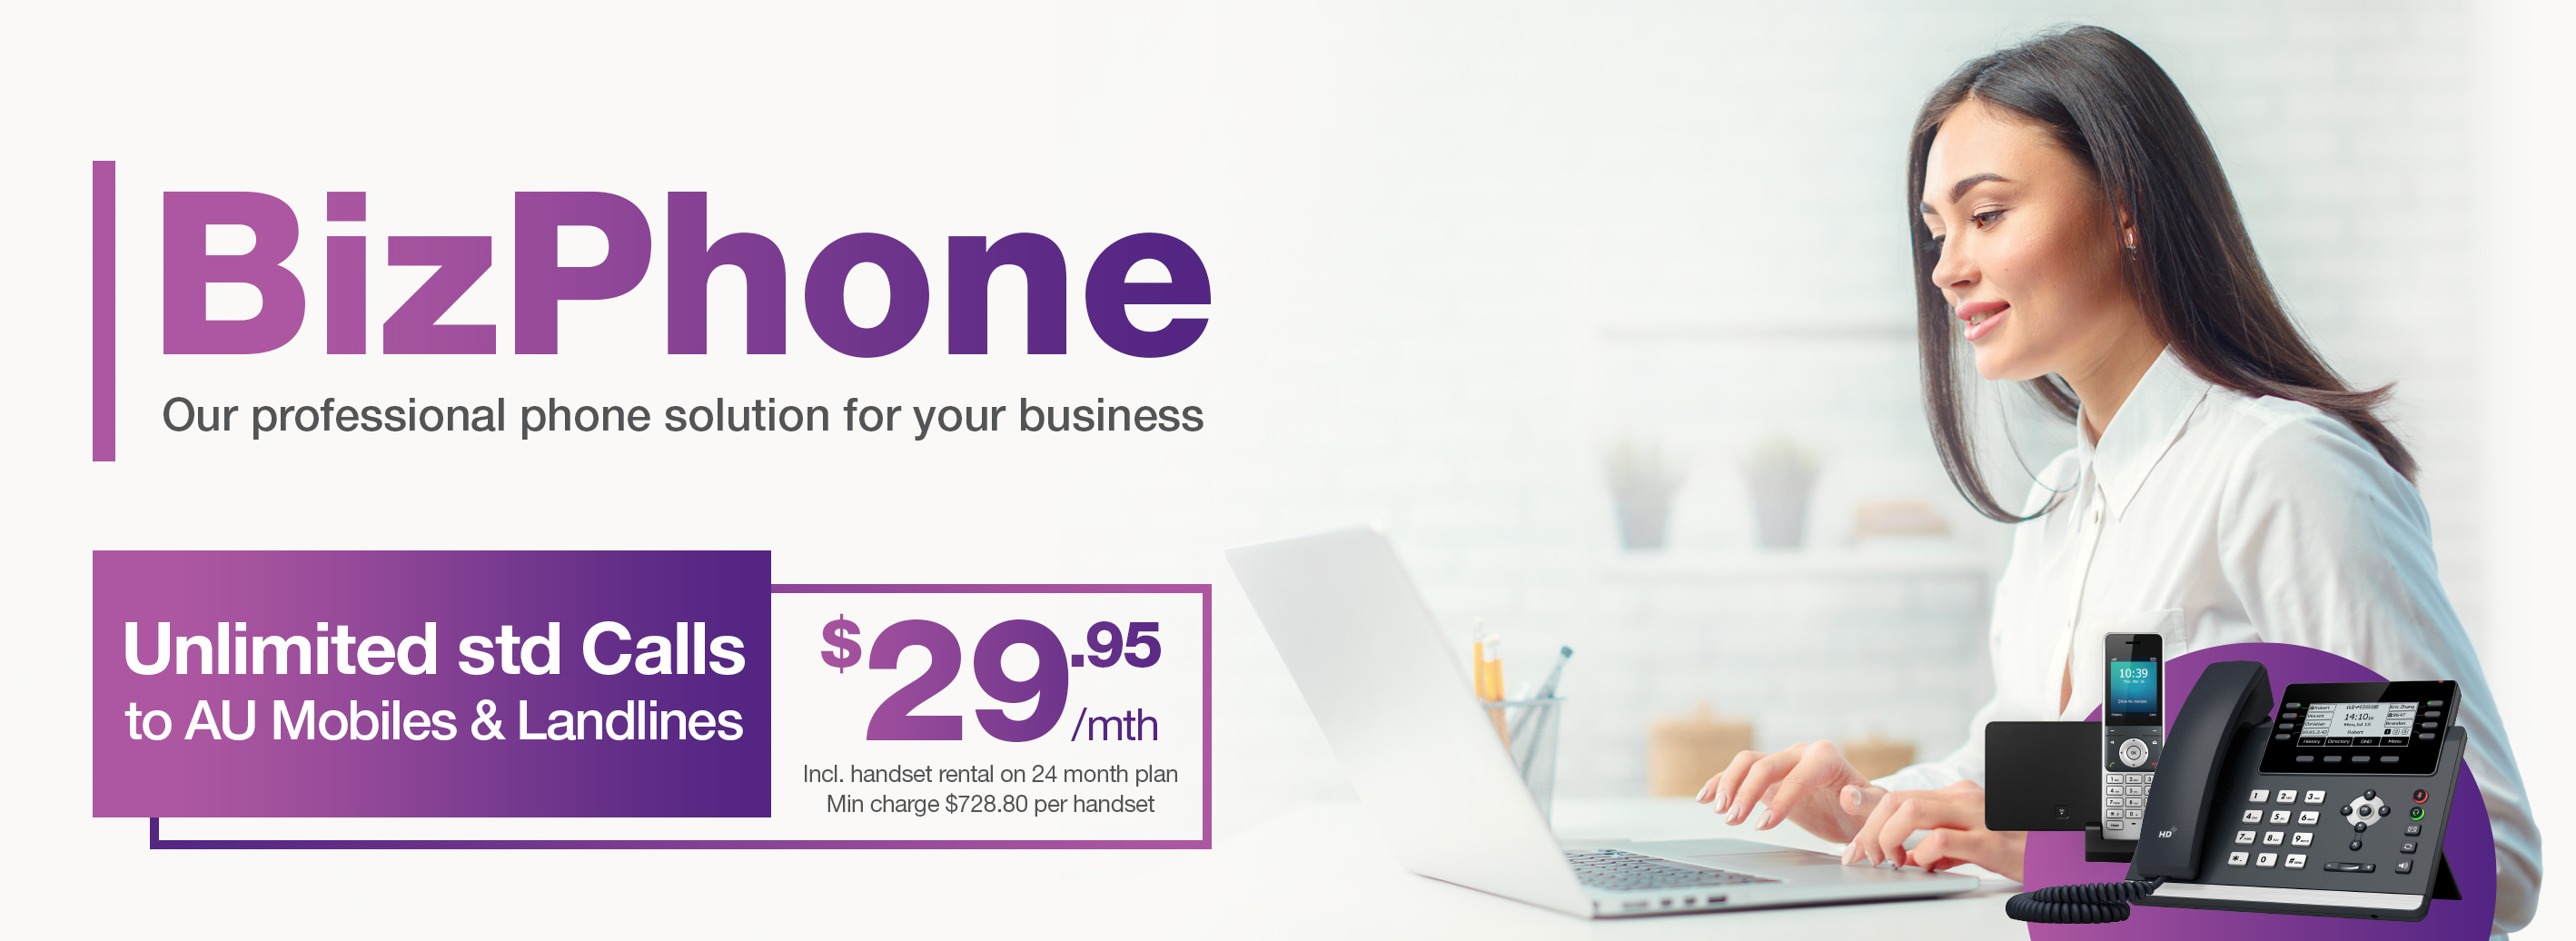 TPG BizPhone - Small Business Phone with Big Business Features